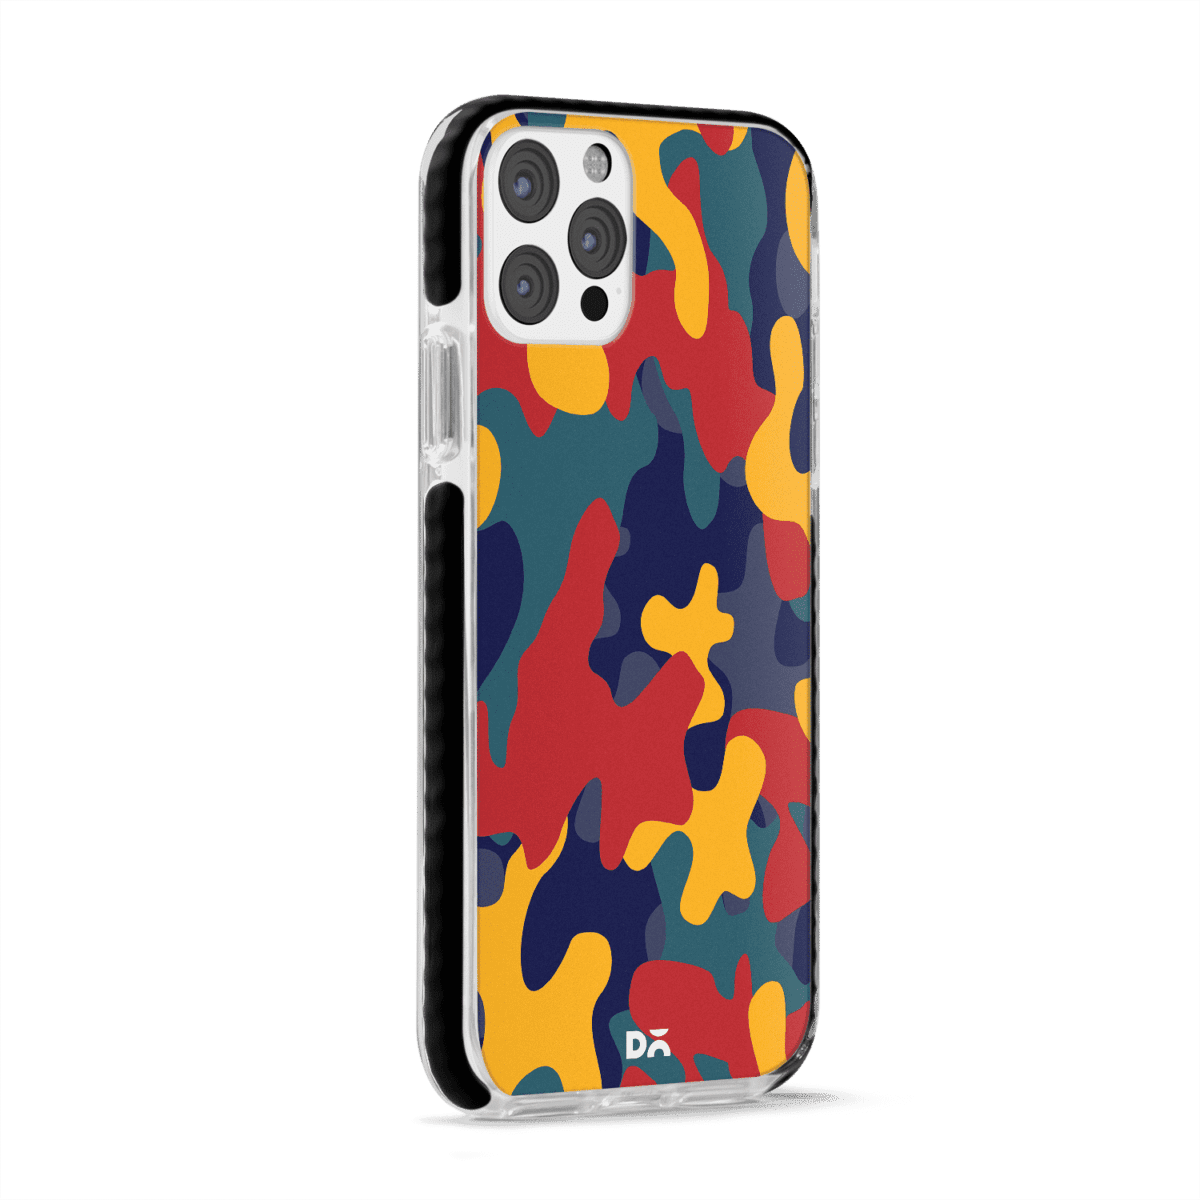 Color Block Camo Case Cover for Apple iPhone 12 Pro and Apple iPhone 12 Pro Maxwith great design and shock proof | Klippik | Online Shopping | Kuwait UAE Saudi